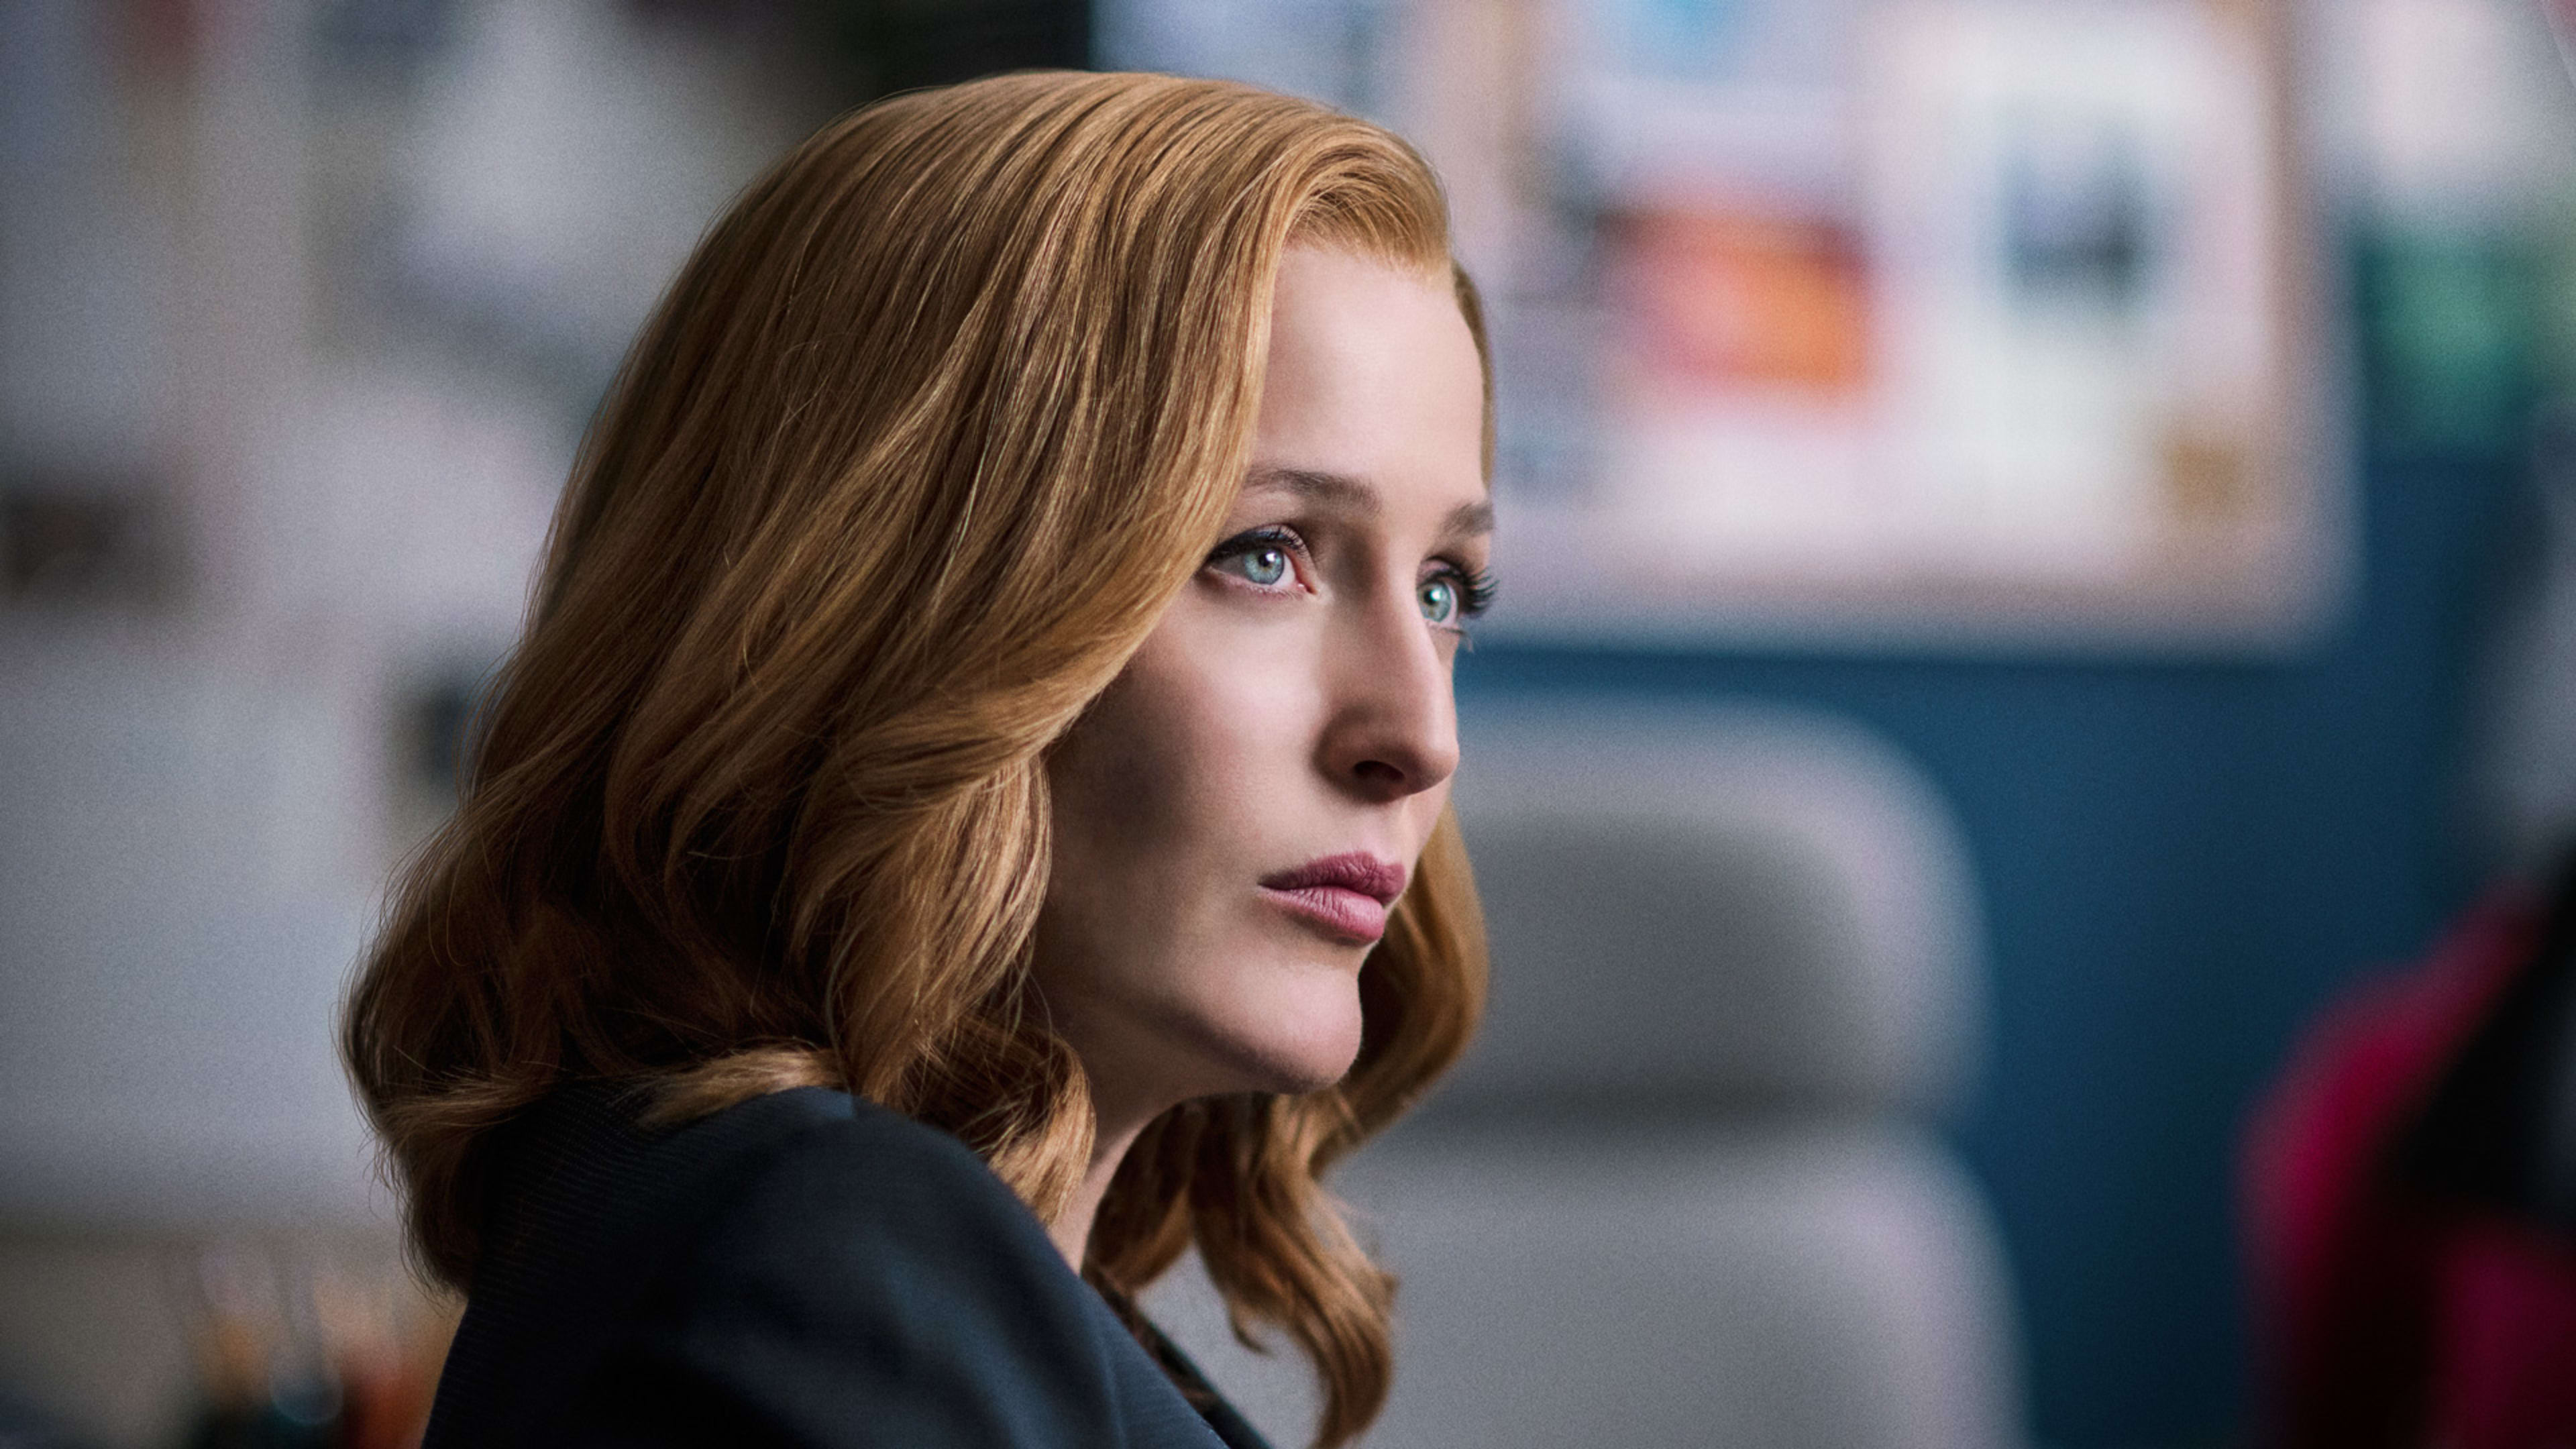 Women Who Watched “The X-Files” Pursued More Careers In STEM